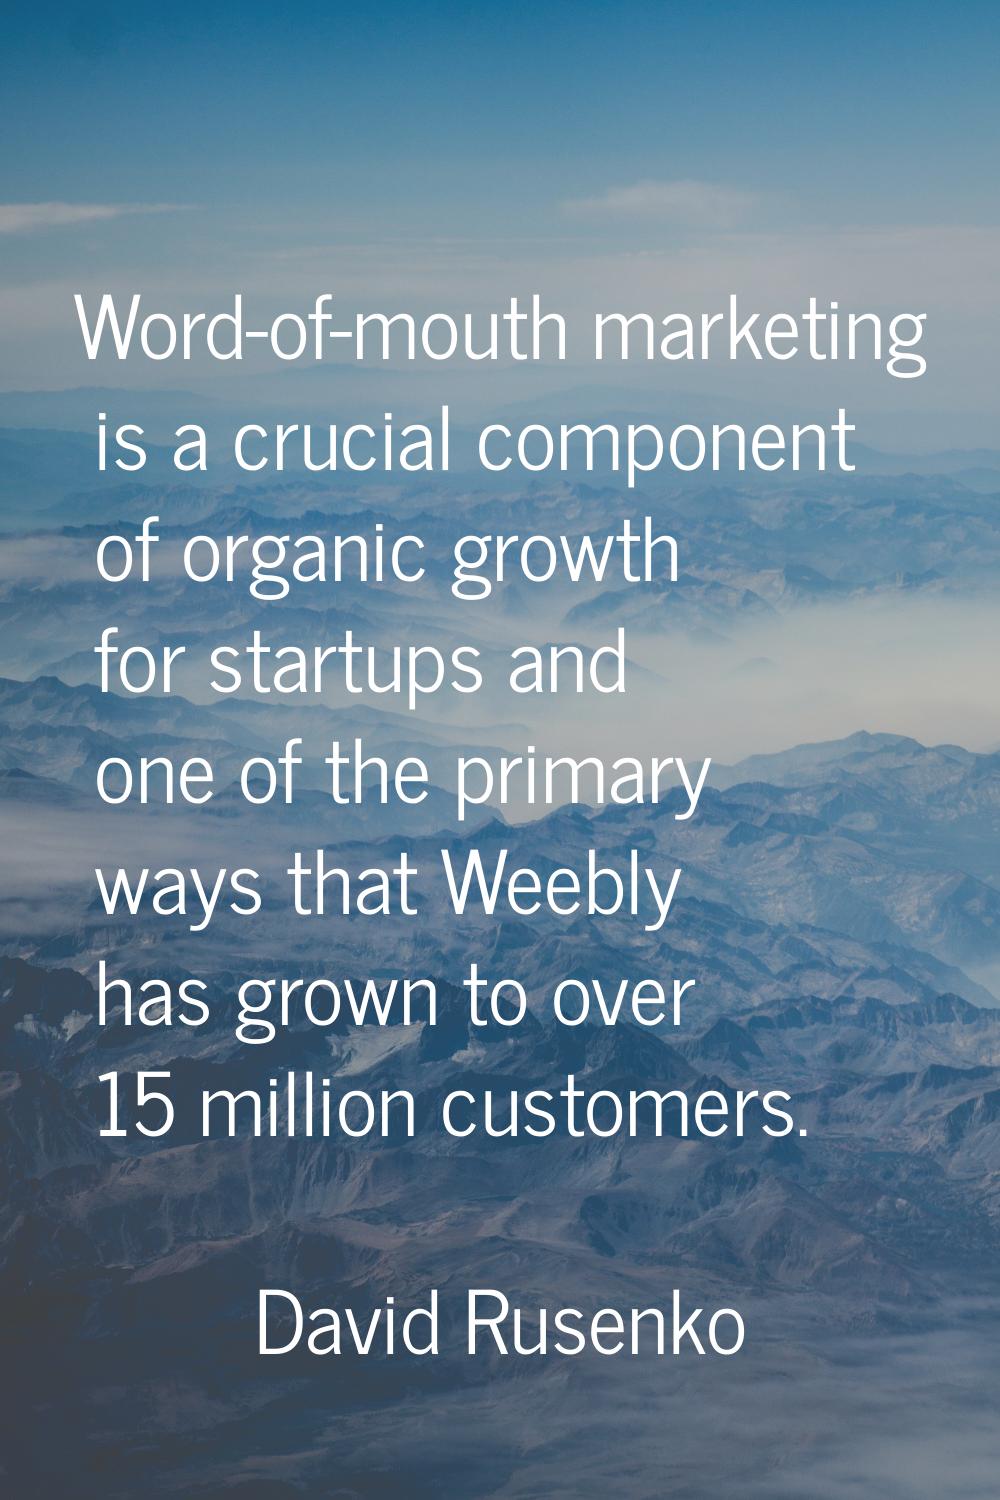 Word-of-mouth marketing is a crucial component of organic growth for startups and one of the primar